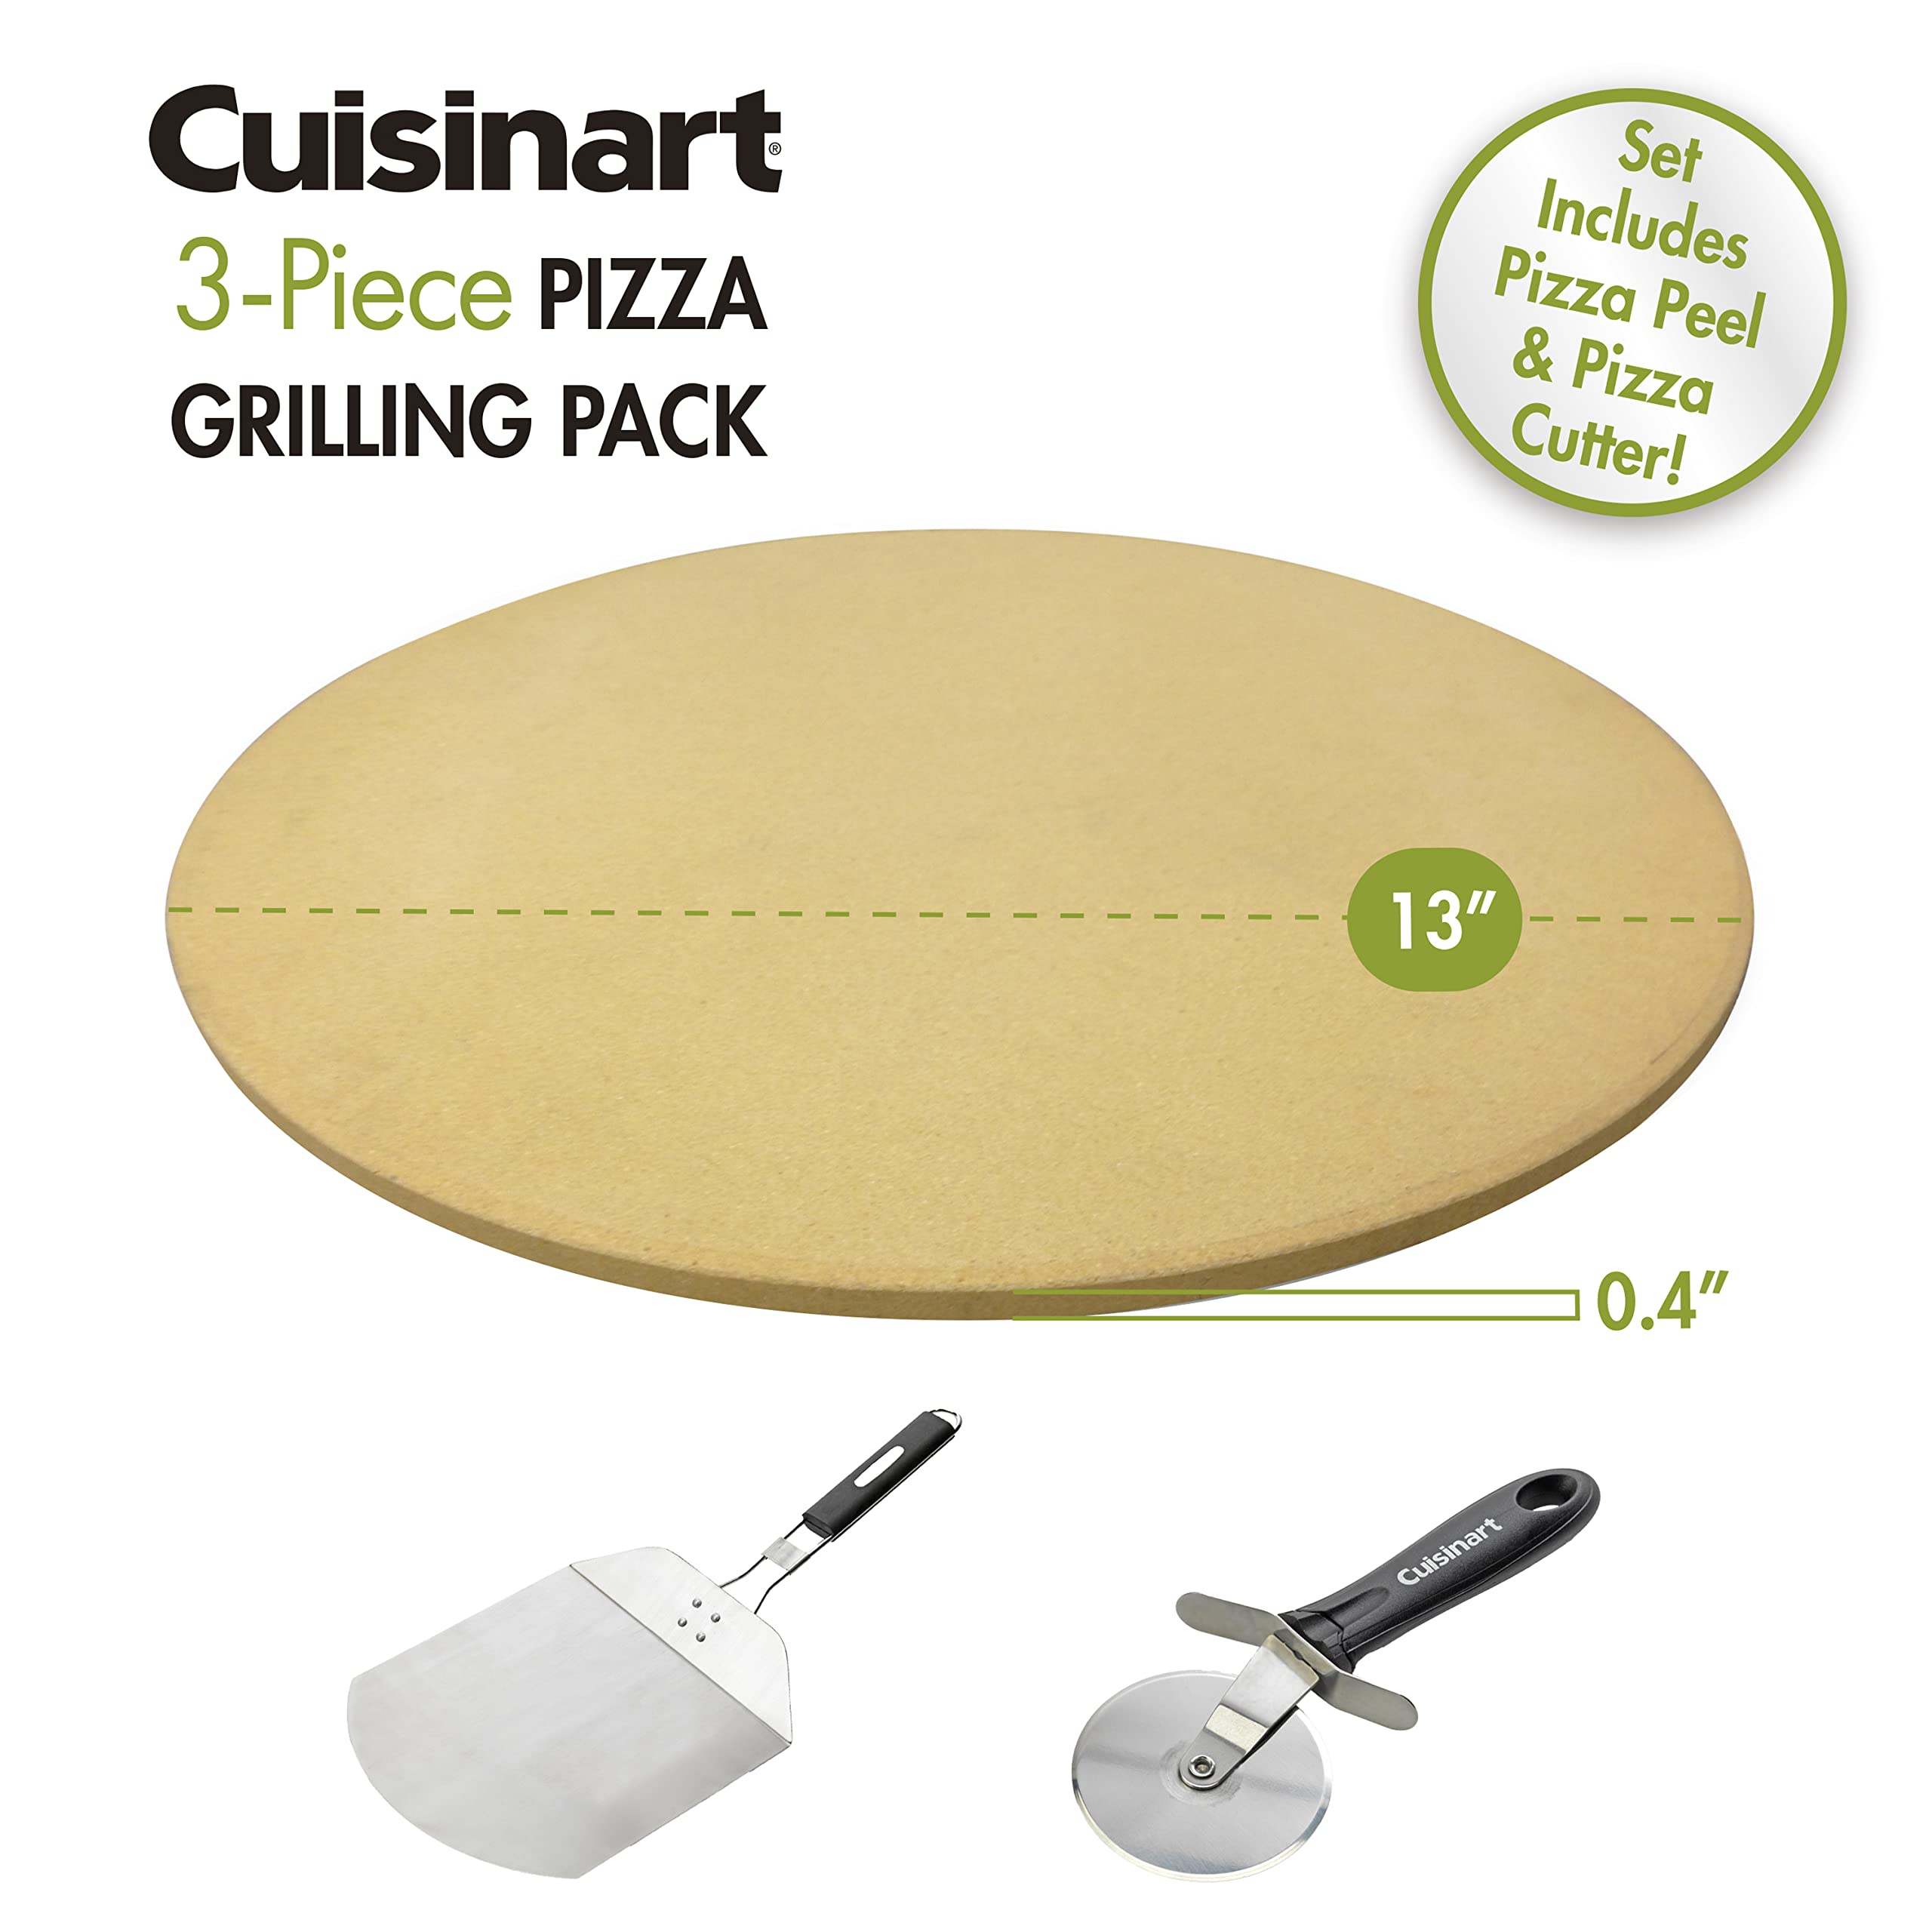 Cuisinart CPS-445, 3-Piece Pizza Grilling Set, Stainless Steel